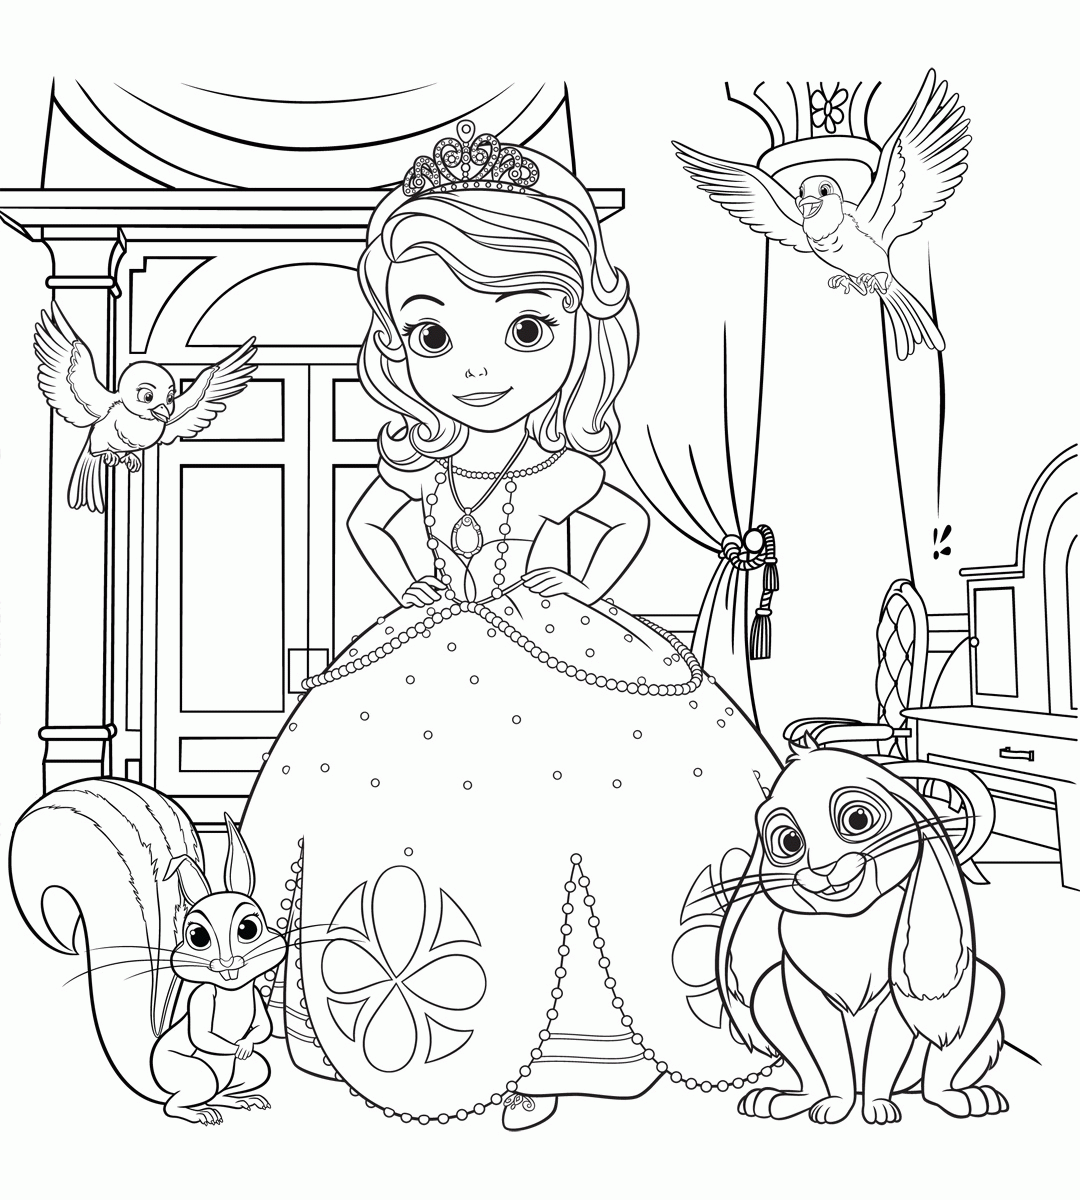 Sofia the First Coloring Pages Cartoons Sofia the Firsts Printable 2020 5881 Coloring4free